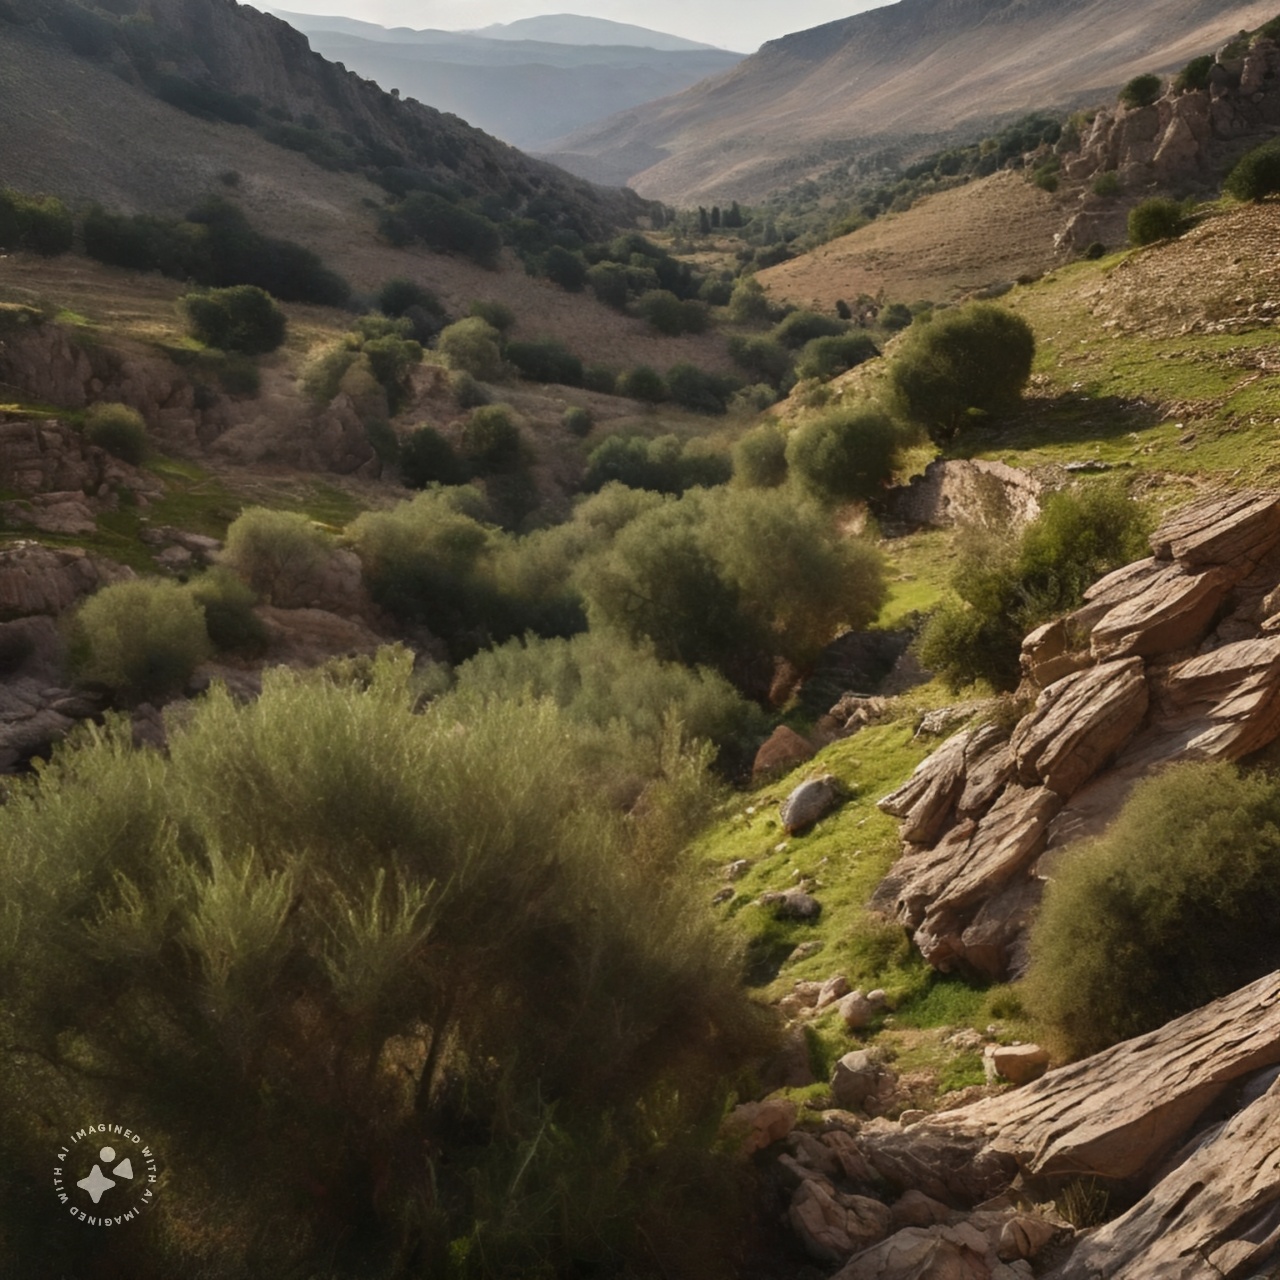 Mountainous-northern-part-of-the-region-of-transjordan_-gilead_-olive-tree